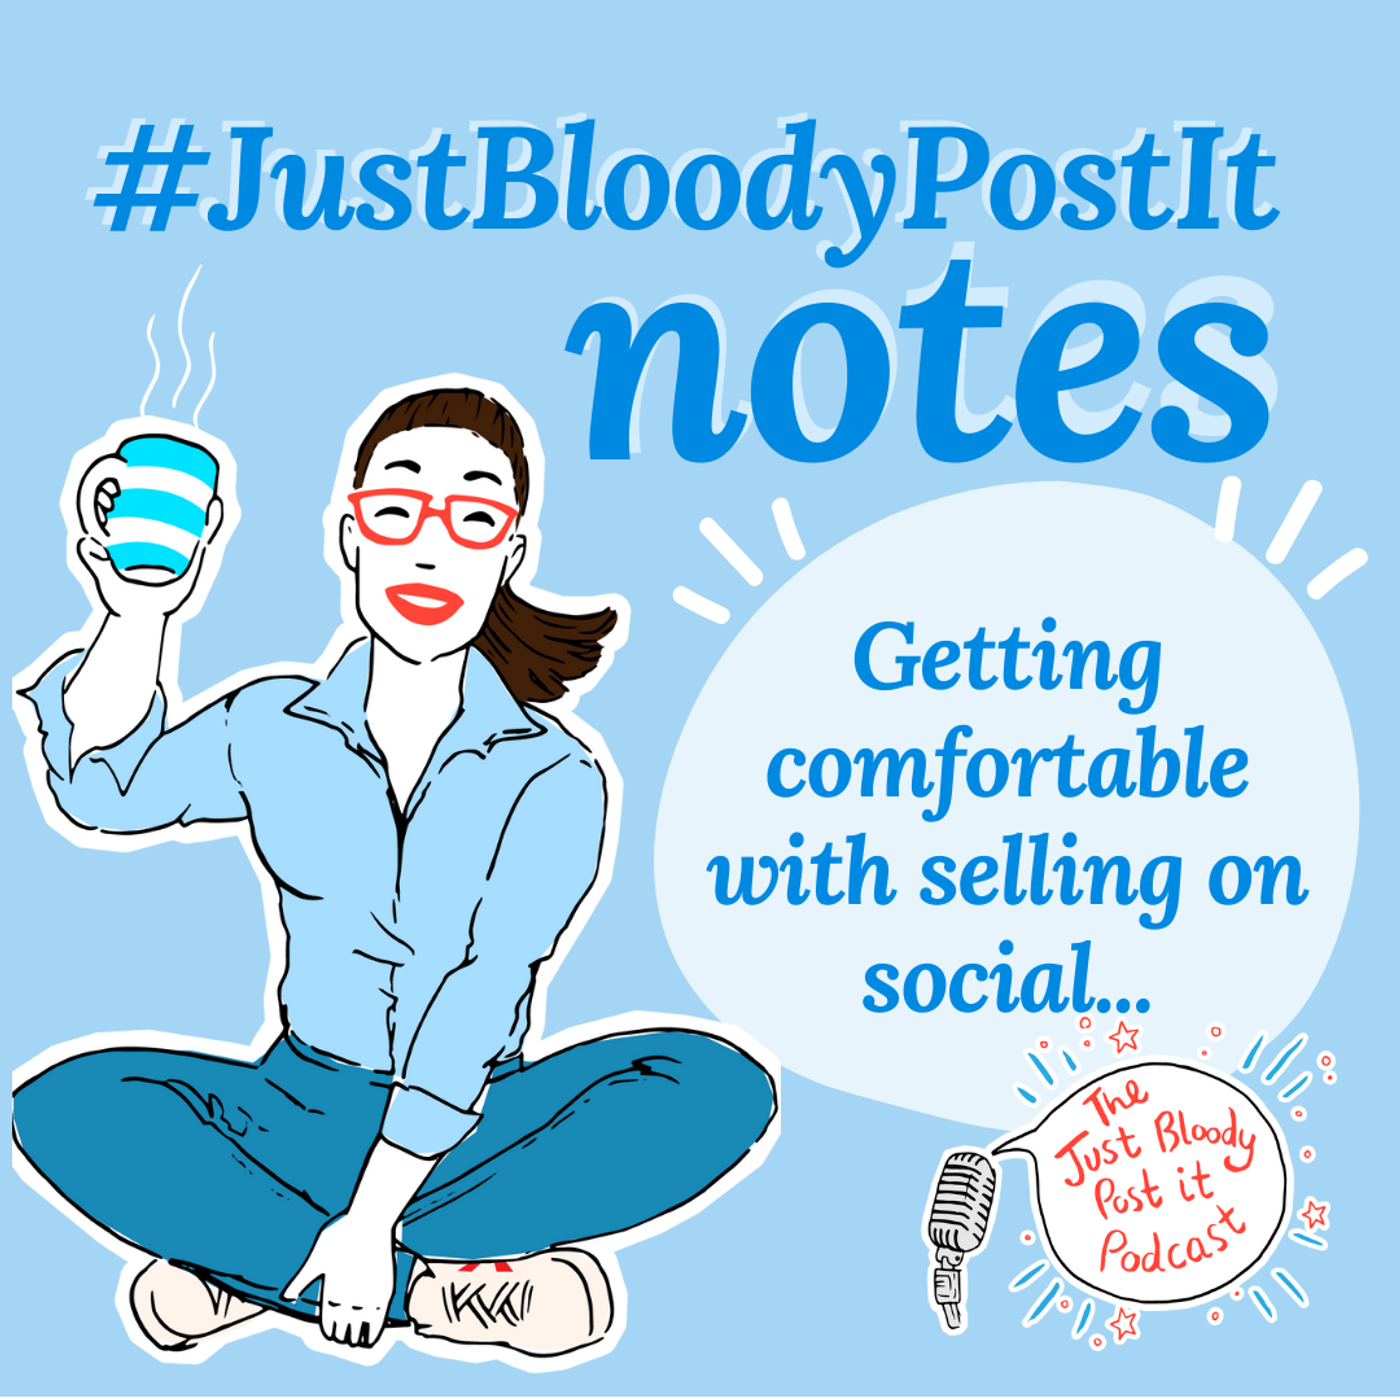 S2 Ep27: #JustBloodyPostIt note: how to get comfortable with selling on social